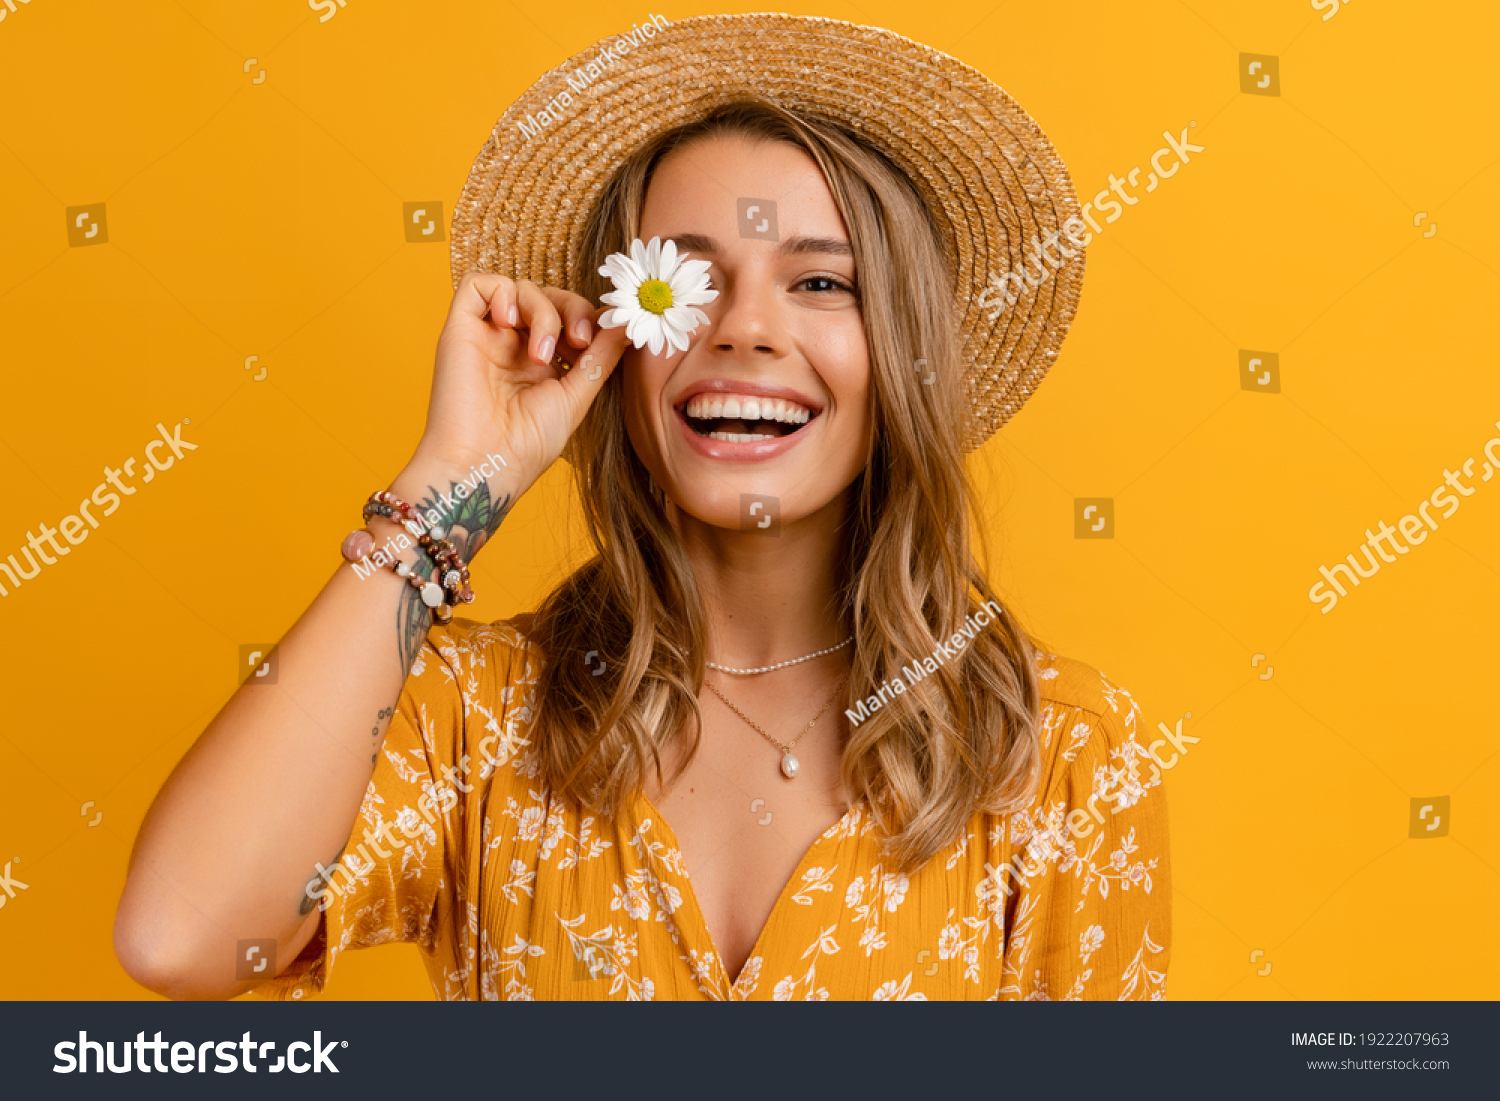 beautiful attractive stylish woman in yellow dress and straw hat holding daisy flower romantic mood posing on yellow background isolated in love summer fashion trend style, natural look #1922207963